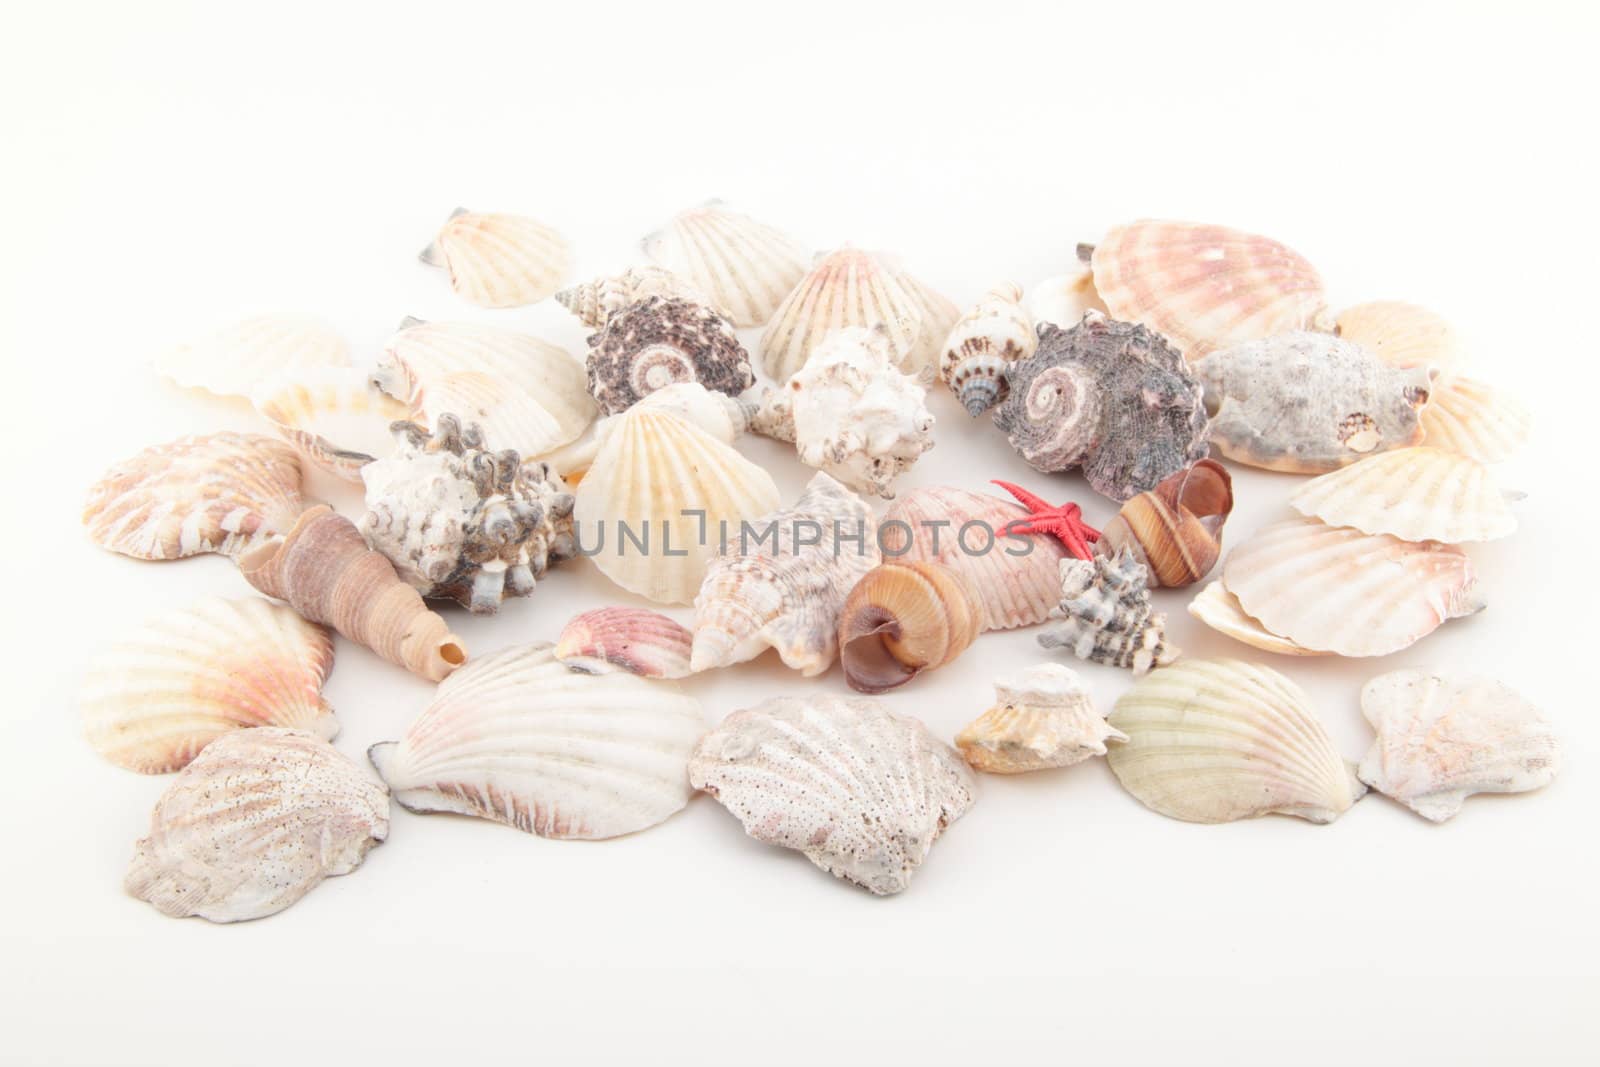 Seashell collection by shutswis